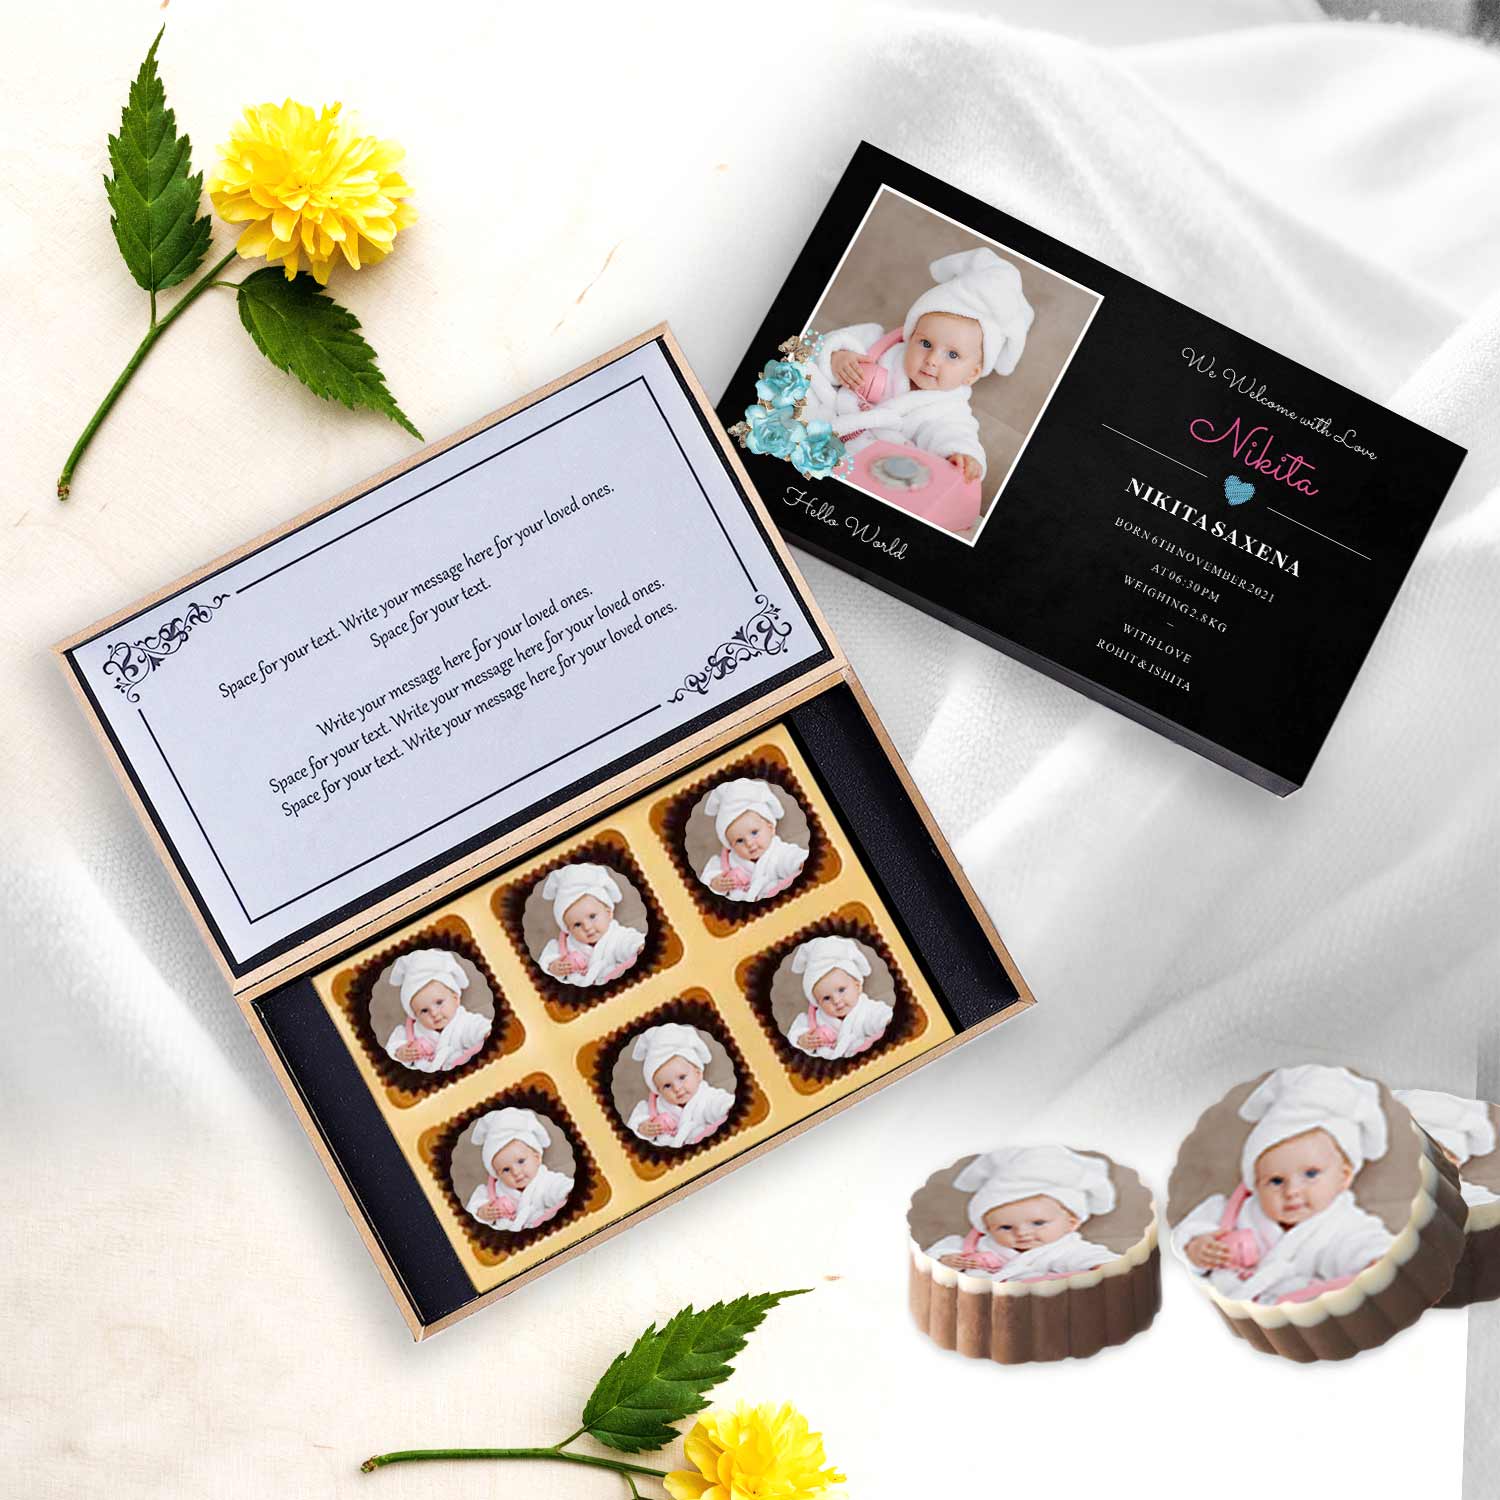 Blue floral designed frame photo printed baby announcement chocolates